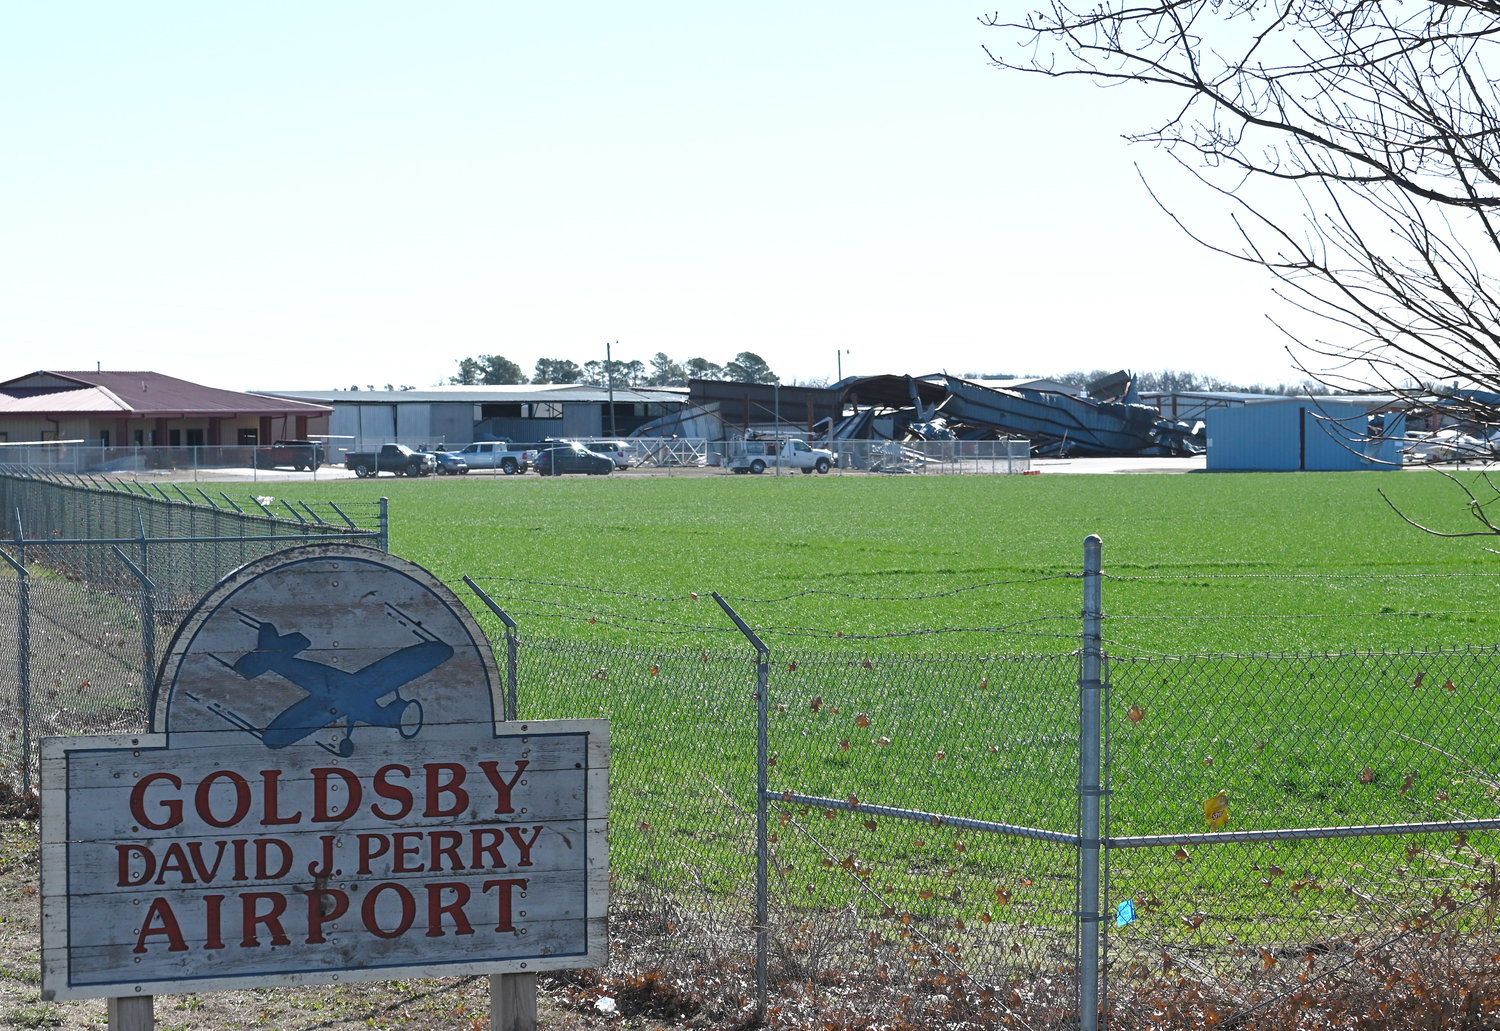 A confirmed EF-2 tornado leveled a hangar and damaged at least 15 airplanes at the David J. Perry Airport in Goldsby Sunday night. It’s being called “the Norman tornado” but it started in Goldsby where it struck first.